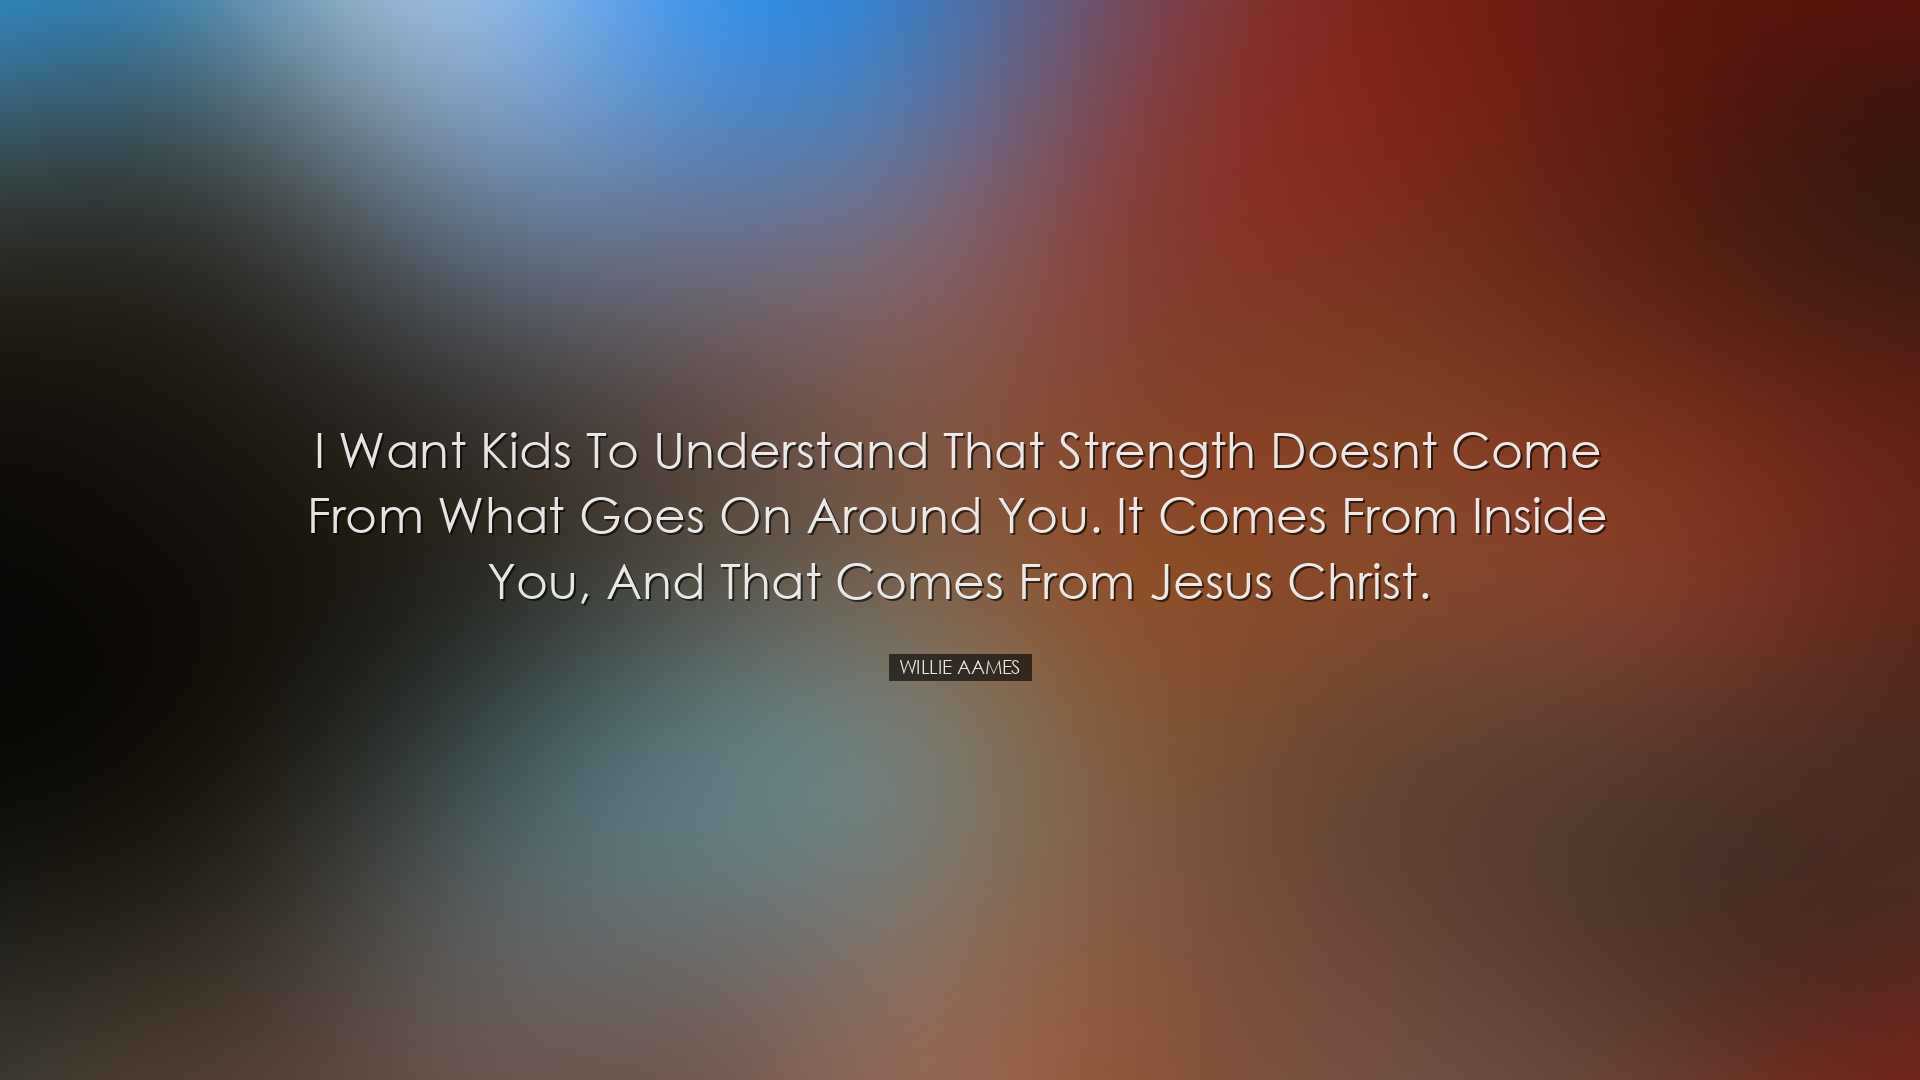 I want kids to understand that strength doesnt come from what goes